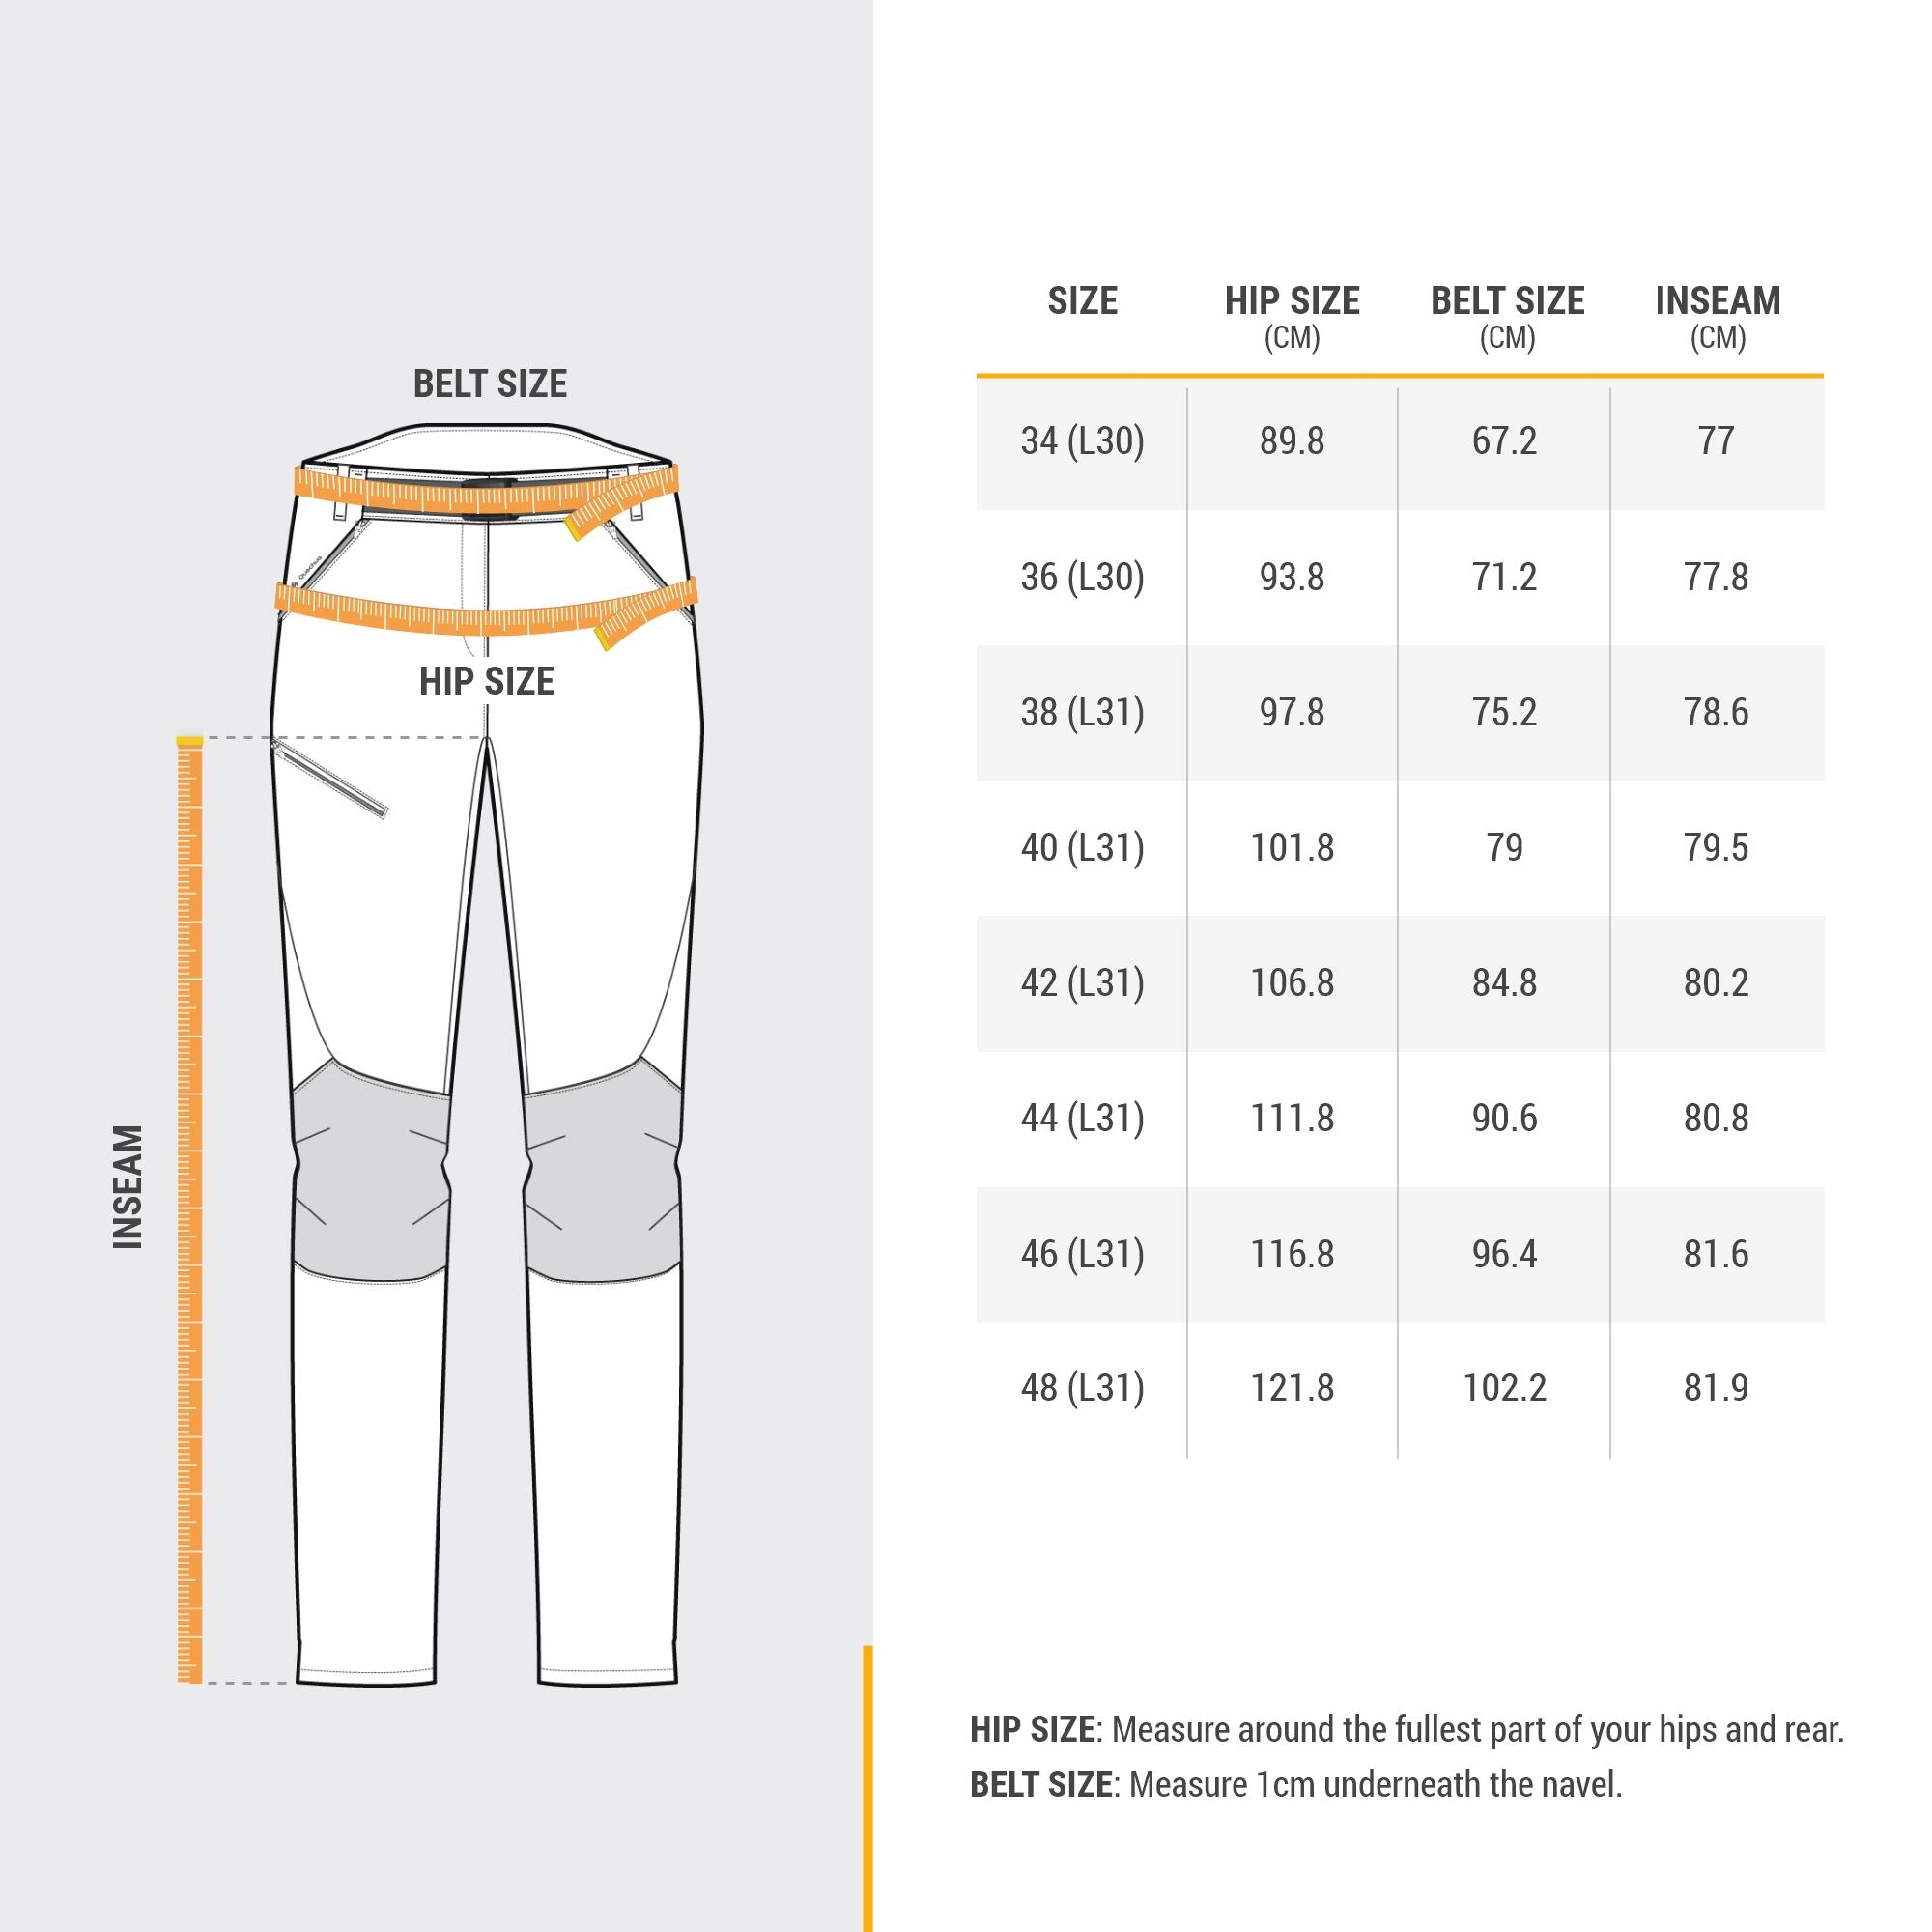 MH500, Hiking Pants, Women's - image 3 of 11